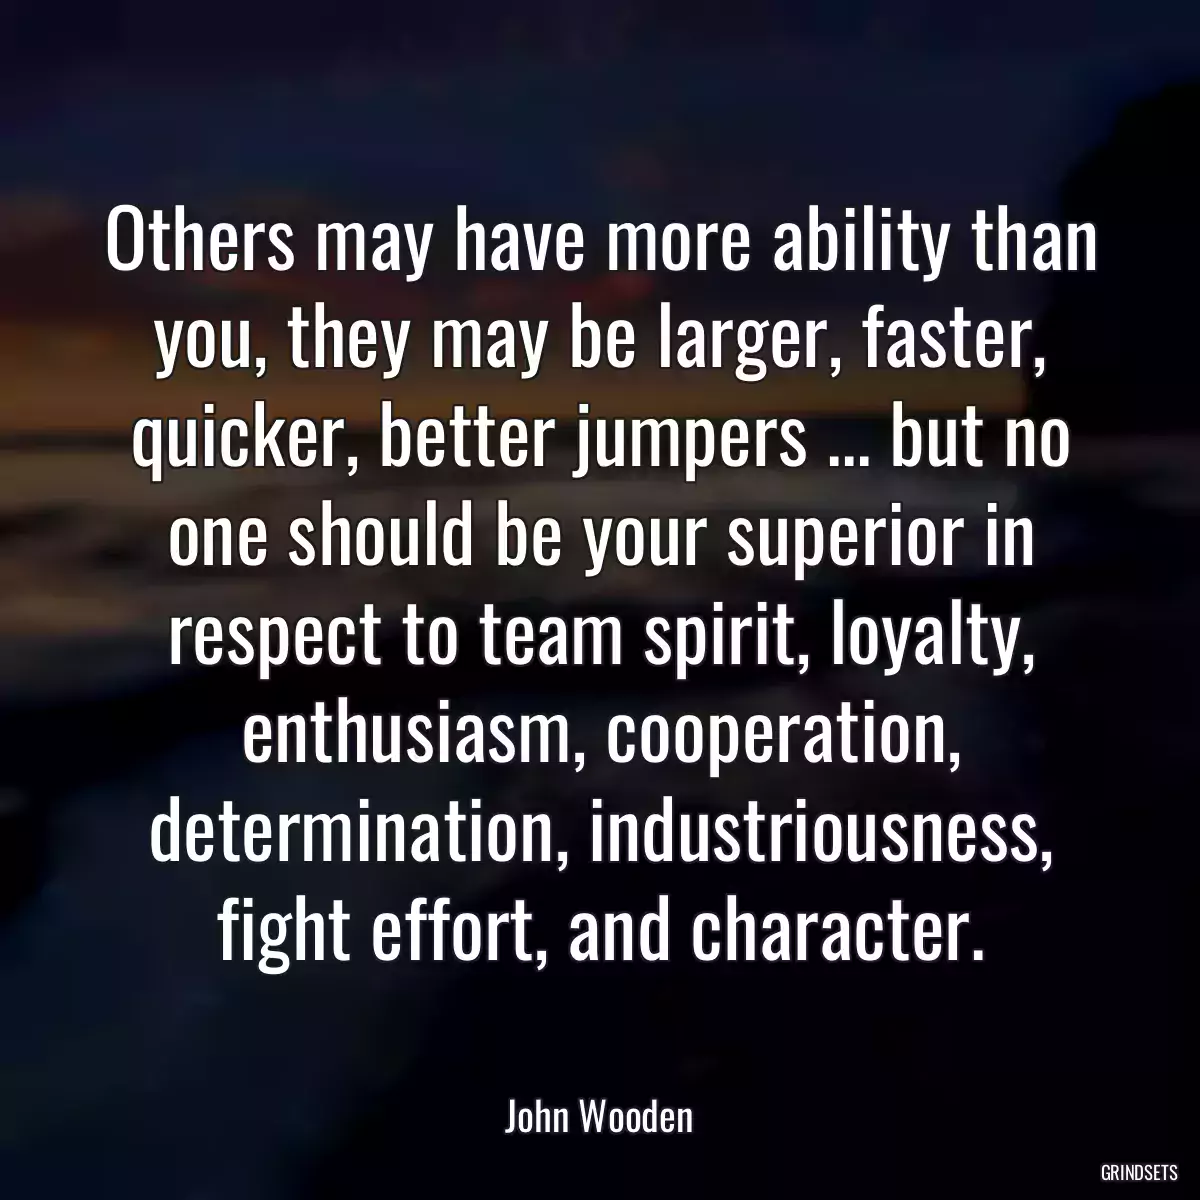 Others may have more ability than you, they may be larger, faster, quicker, better jumpers ... but no one should be your superior in respect to team spirit, loyalty, enthusiasm, cooperation, determination, industriousness, fight effort, and character.